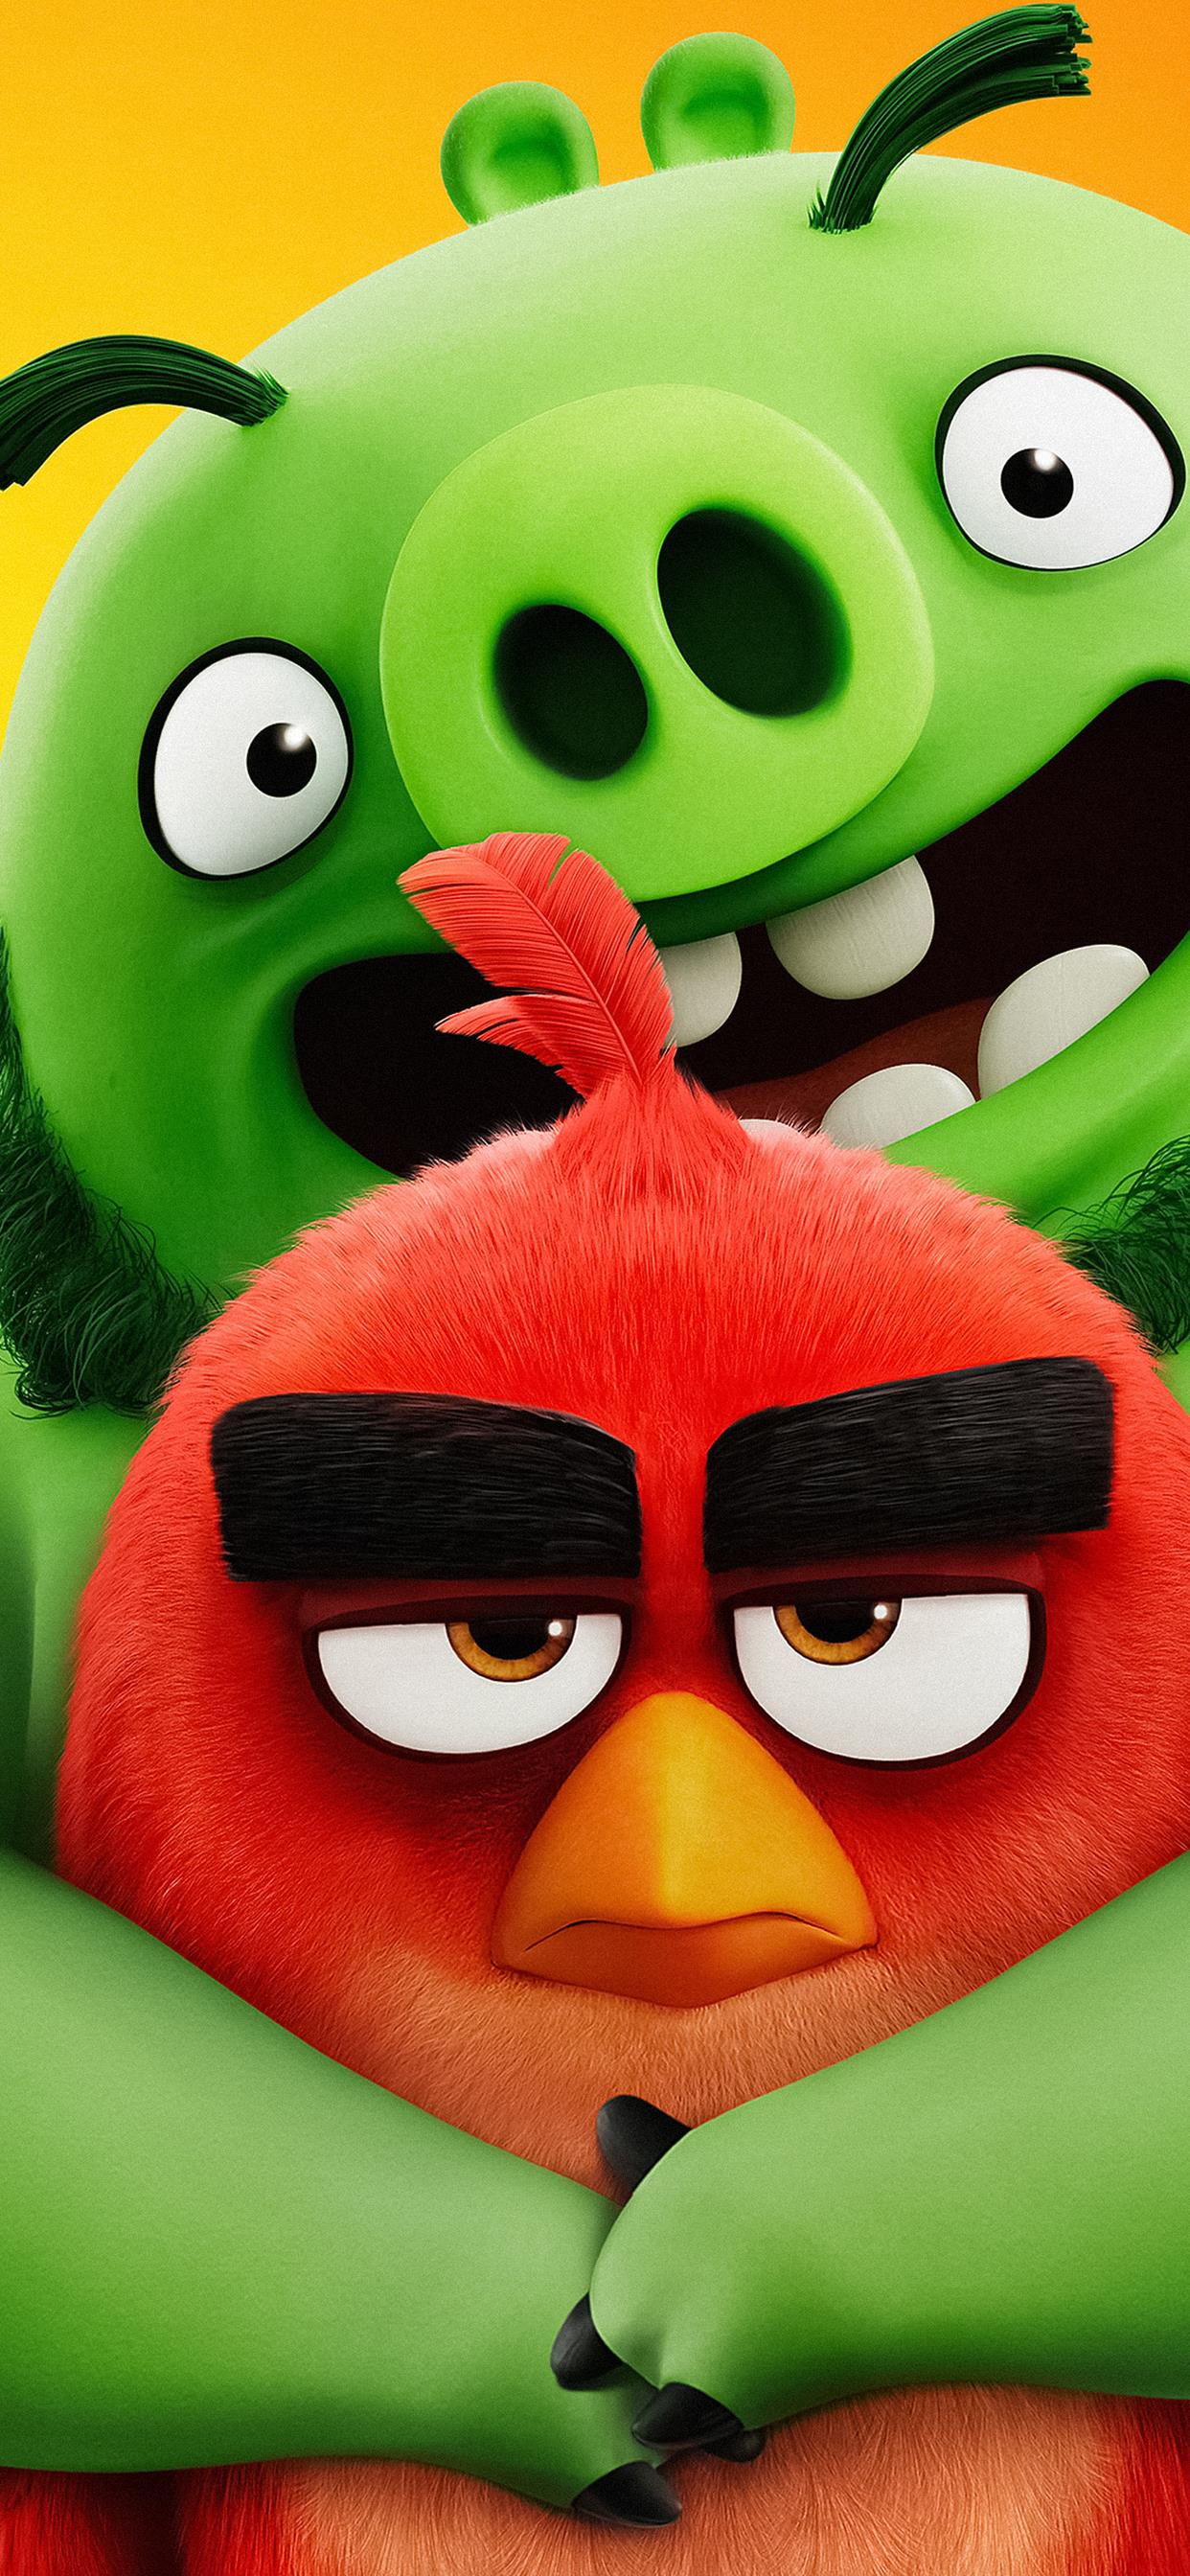 Angry Bird Wallpapers - Top 30 Best Angry Bird Wallpapers Download